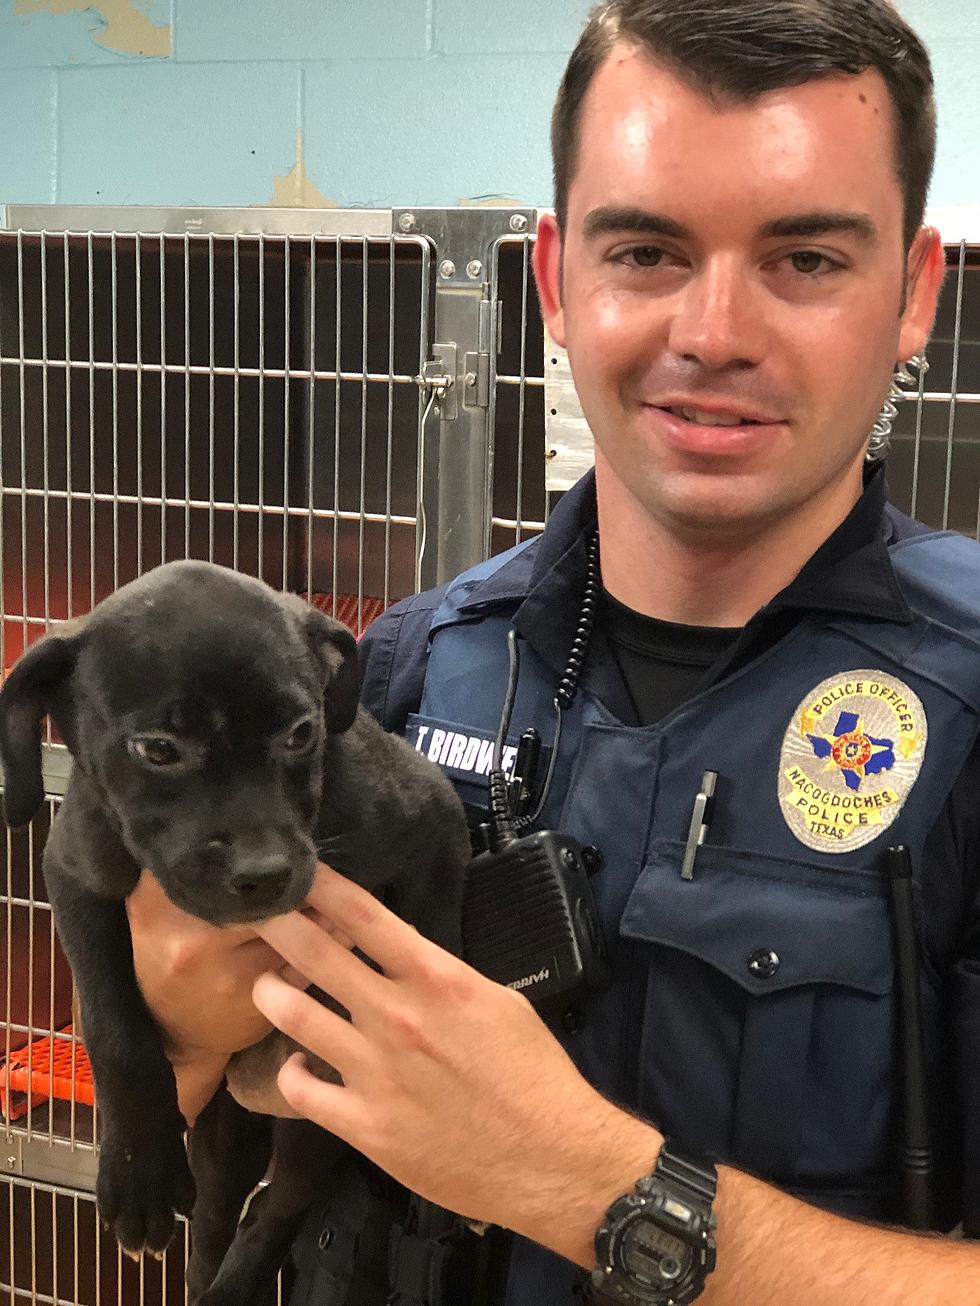 Nacogdoches Police Dept.’s Pet of the Week Is Back – Meet Martha!